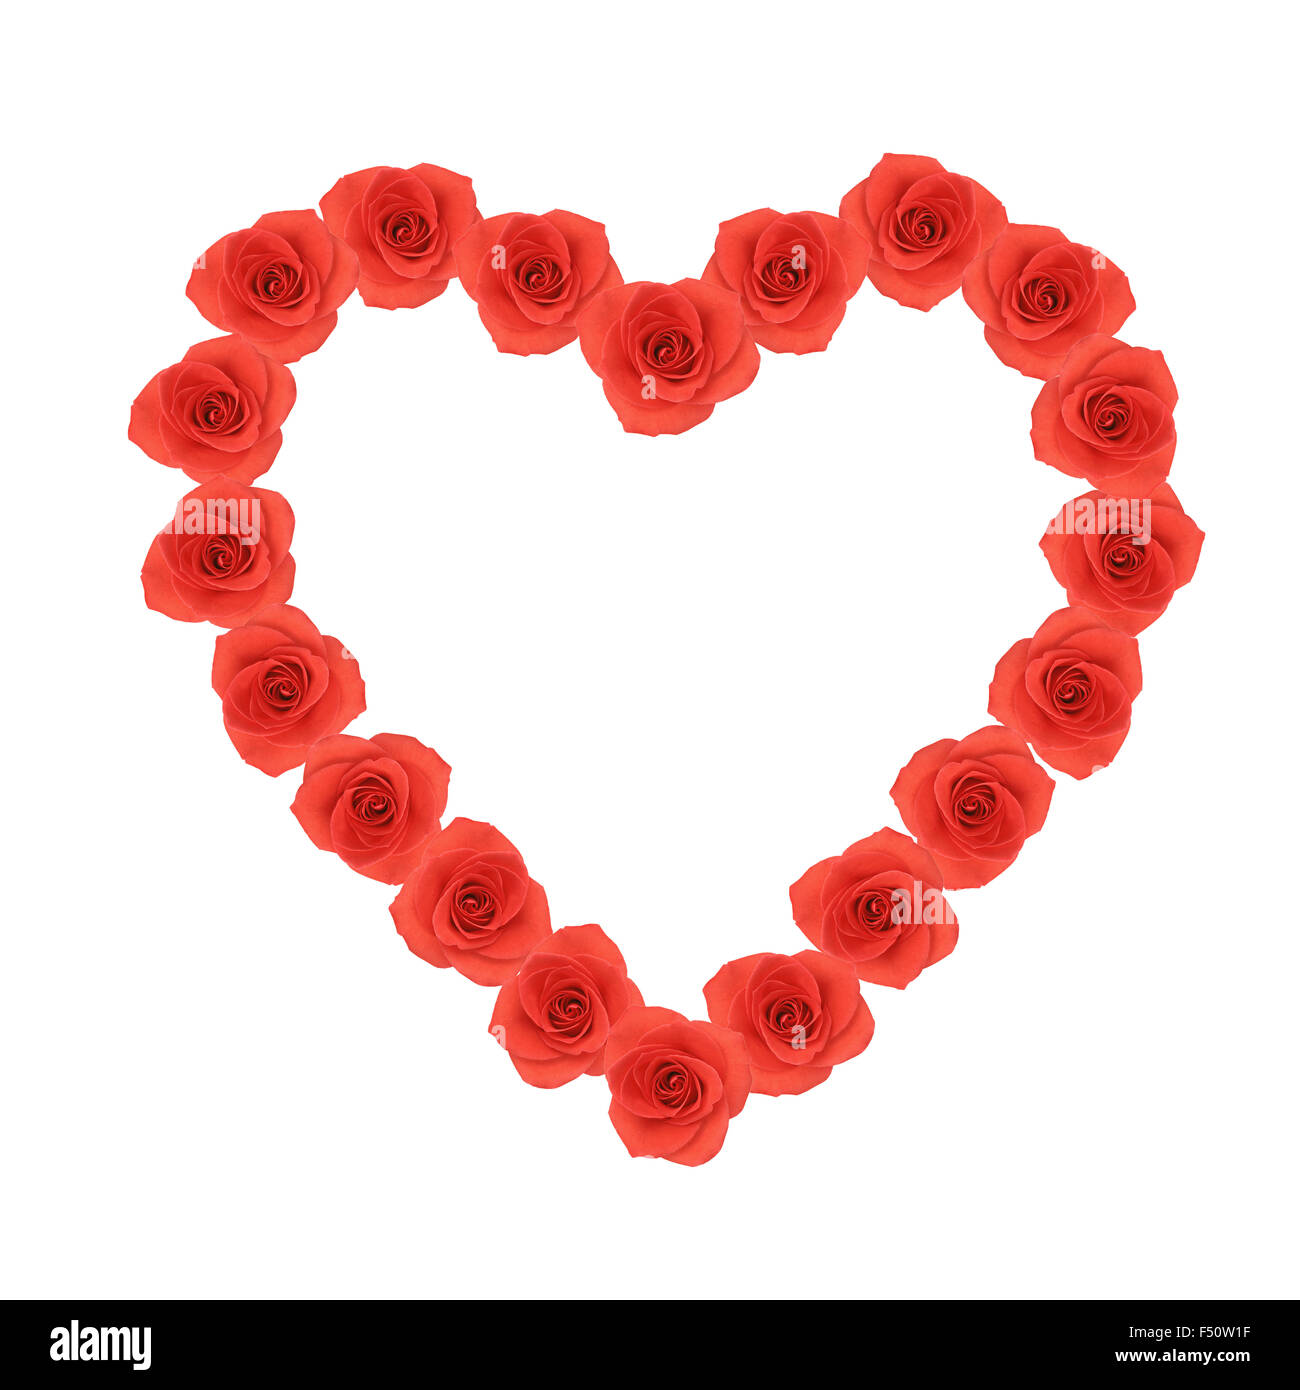 Heart shape red rose flowers Stock Photo - Alamy